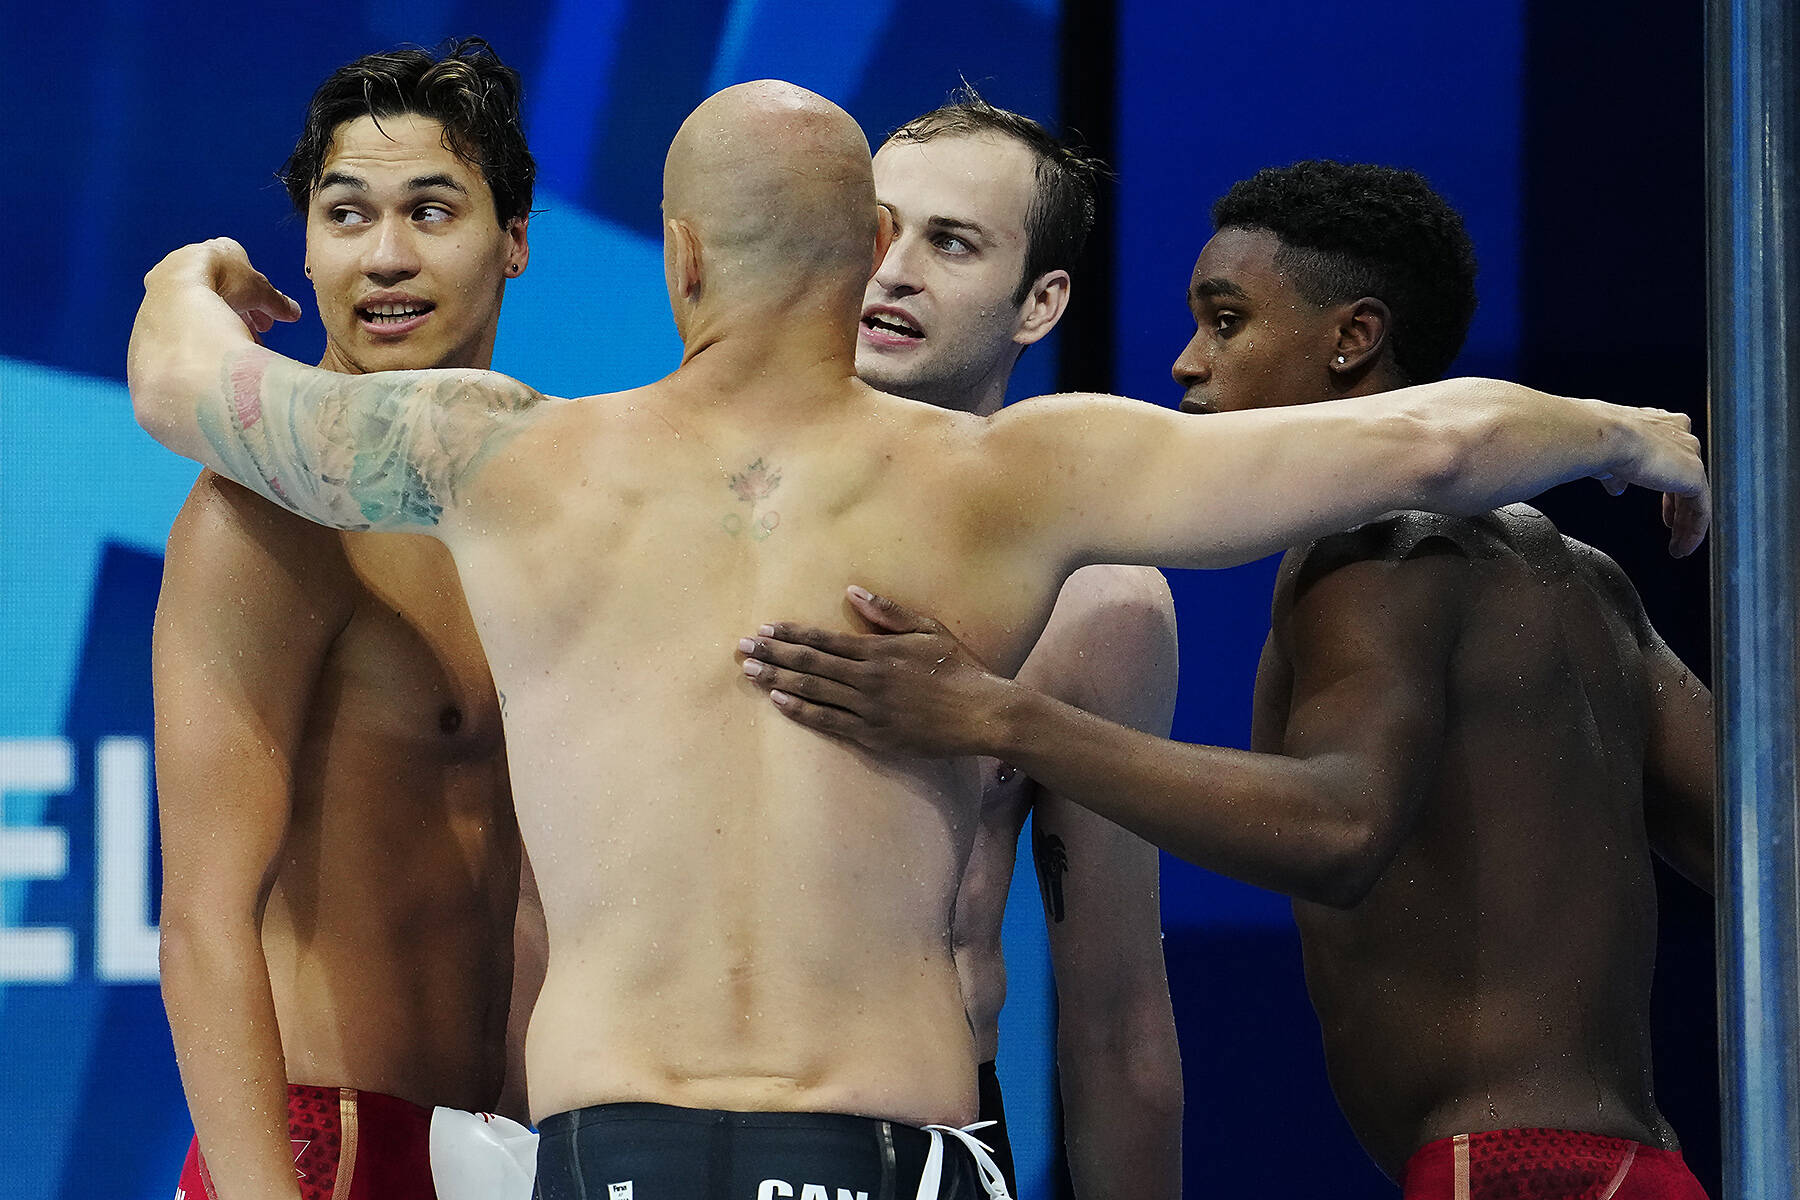 Canada’s Markus Thormeyer (left) huddles with Brent Hayden, Yuri Kisil and Joshua Liendo following a fourth place finish in the men’s 4 x 100m freestyle relay during the Tokyo Olympics on Monday, July 26, 2021. (THE CANADIAN PRESS/Frank Gunn photo)